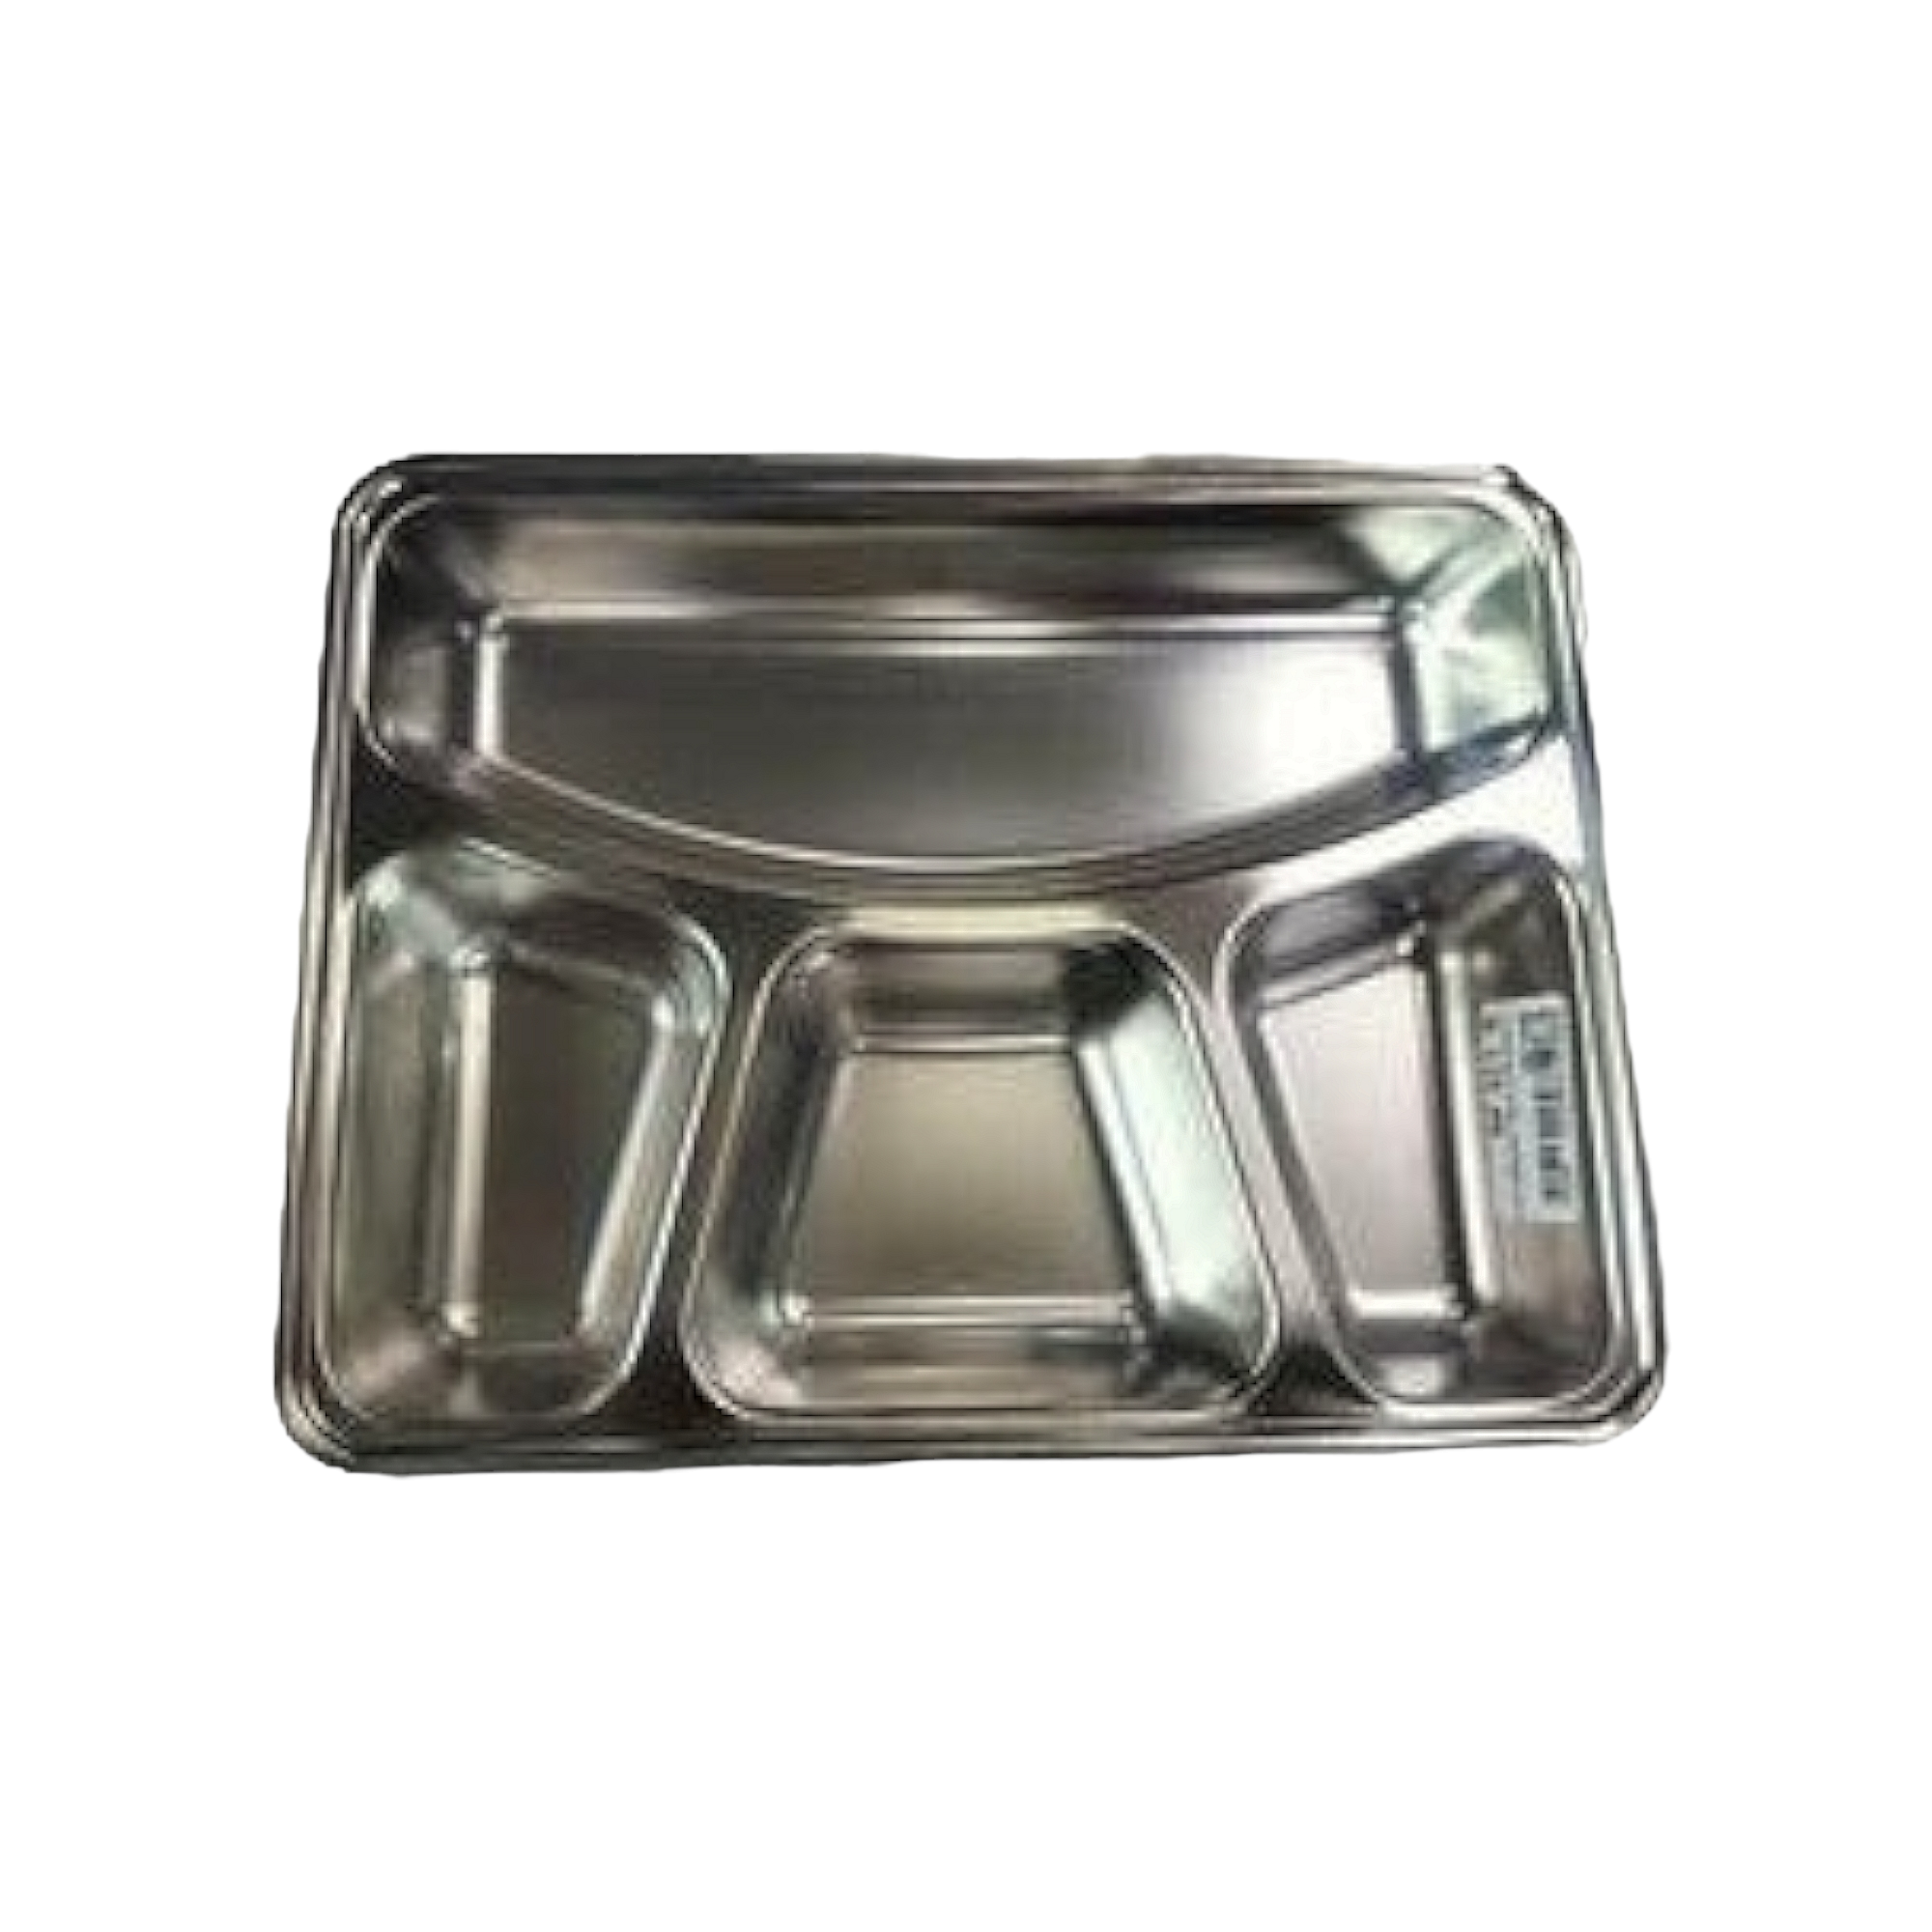 Square 4 Division Stainless Steel Serving Plate